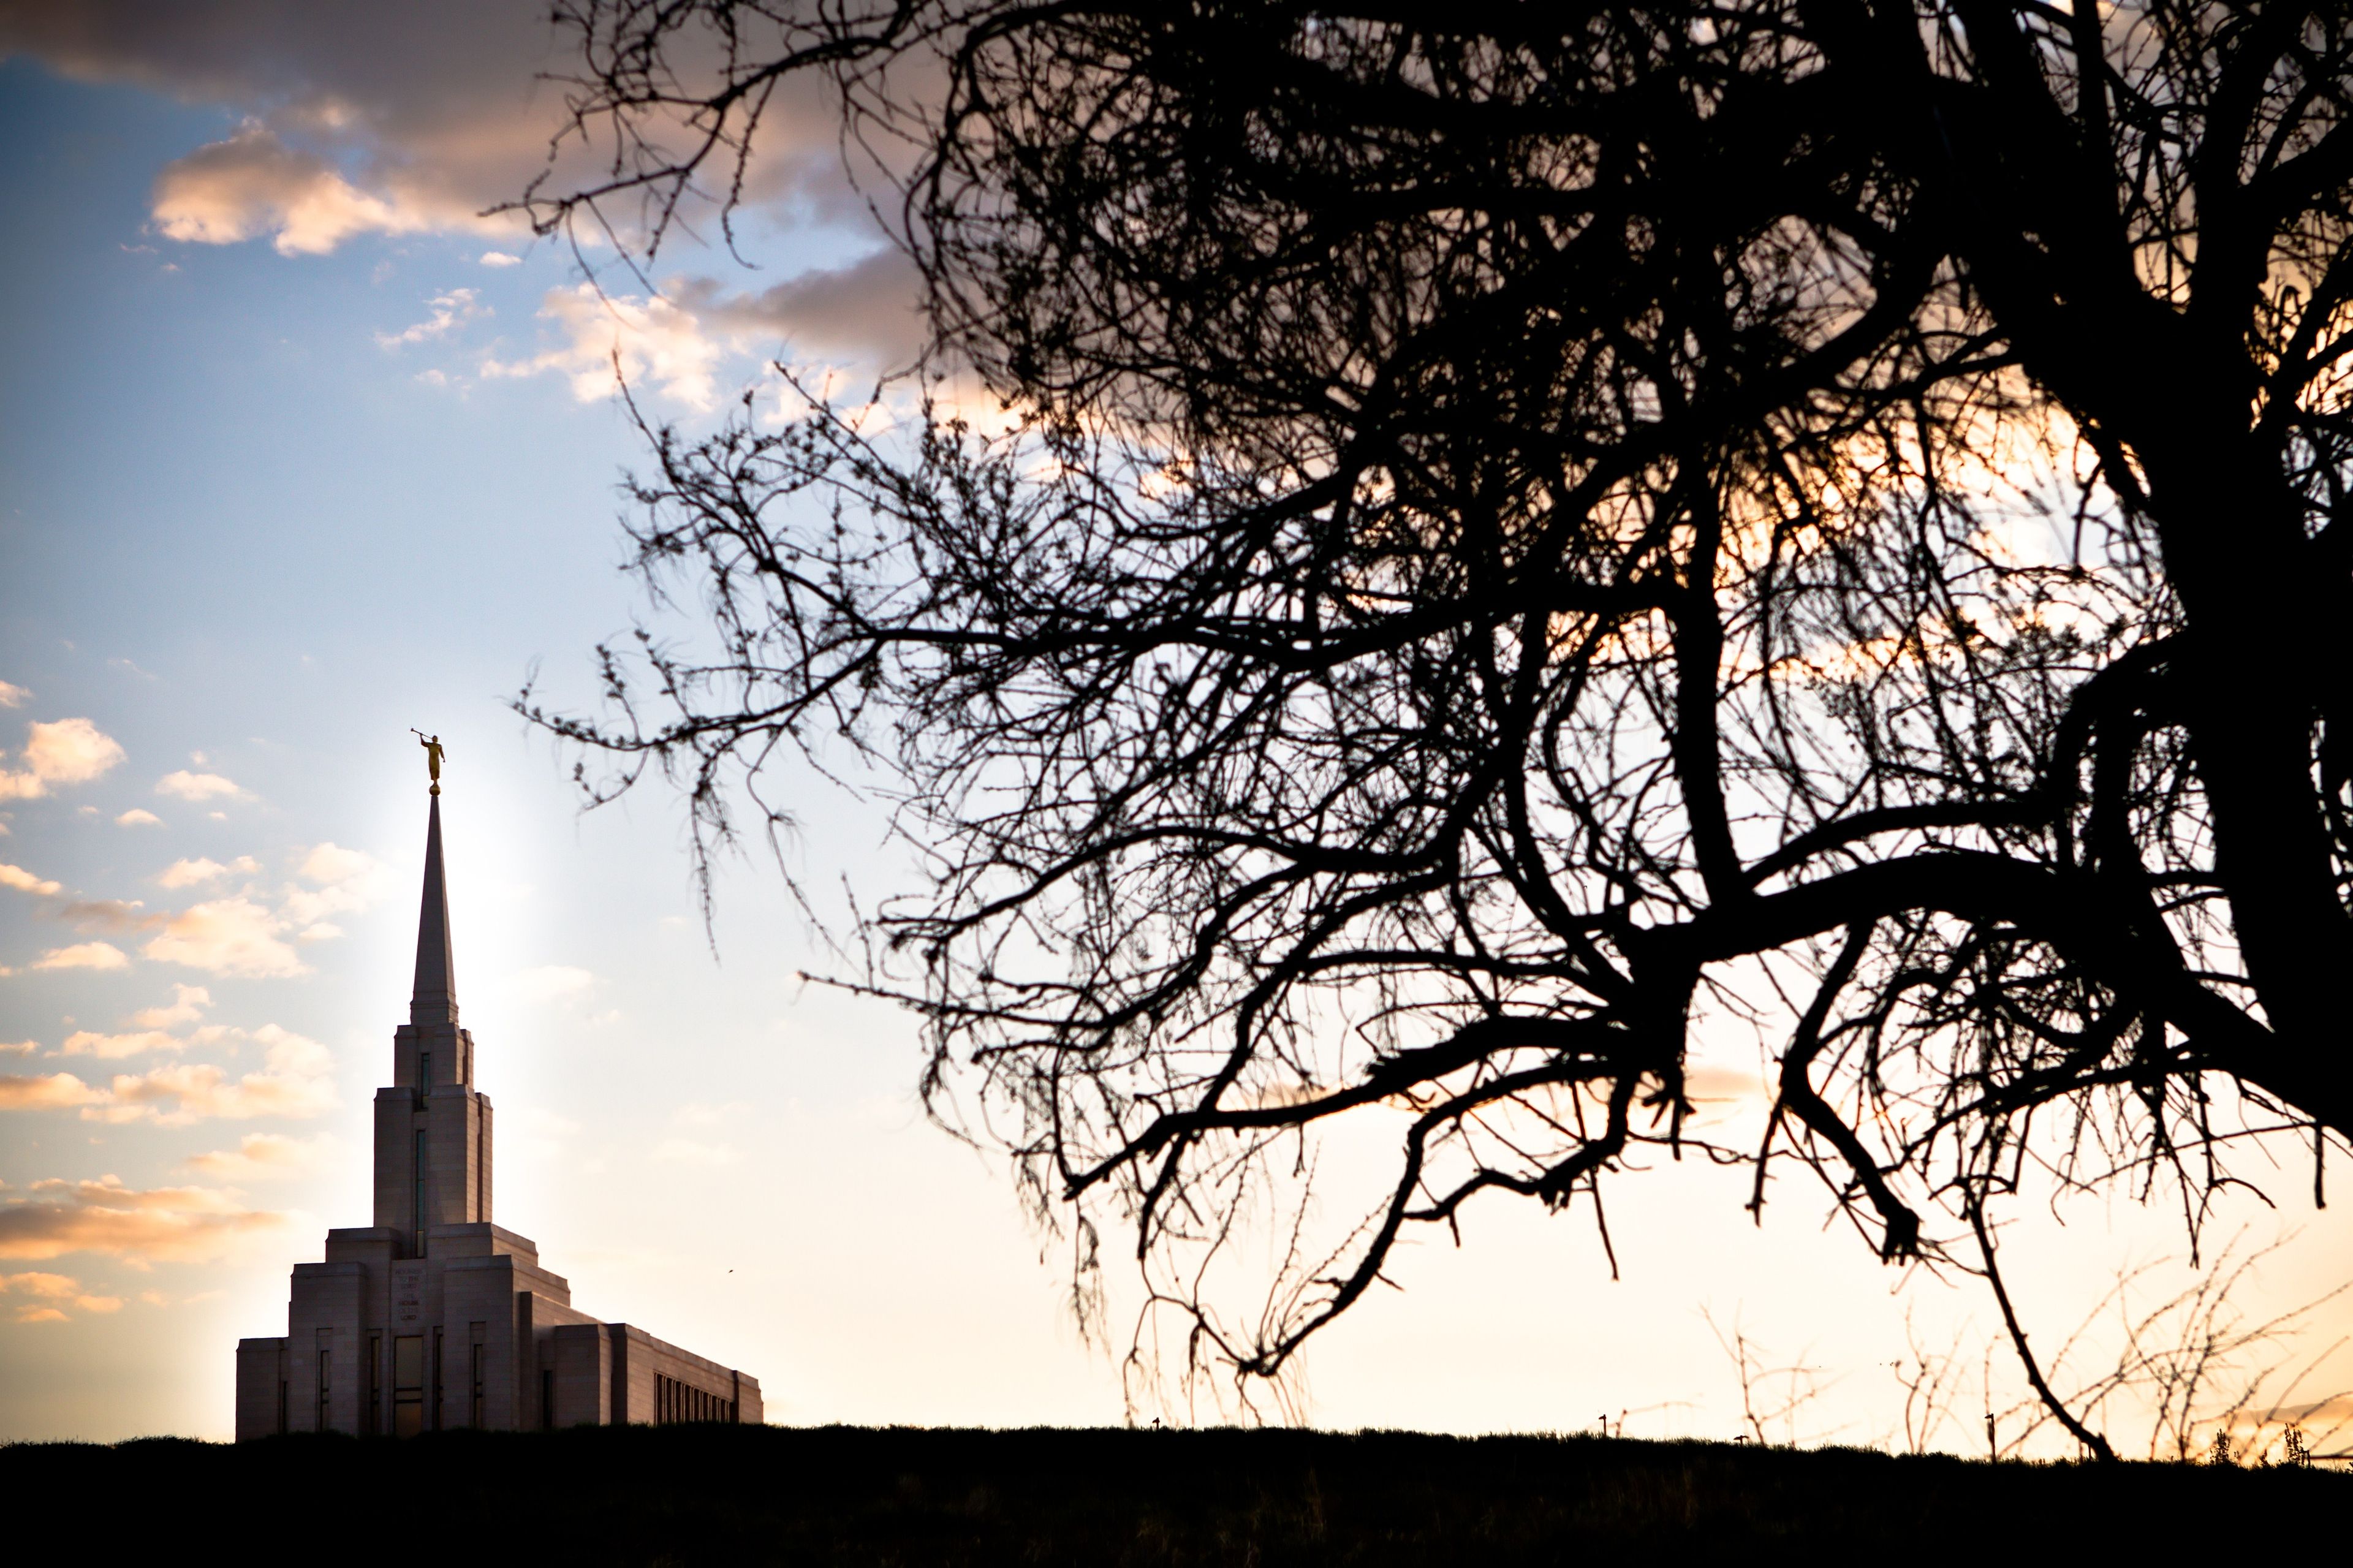 The Oquirrh Mountain Utah Temple at sunset, including scenery.